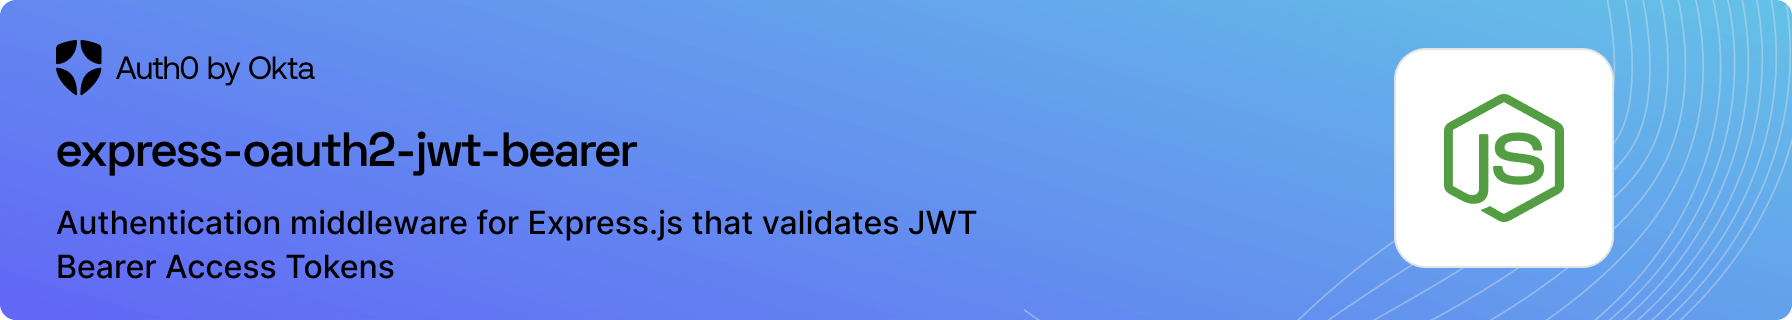 Authentication middleware for Express.js that validates JWT Bearer Access Tokens